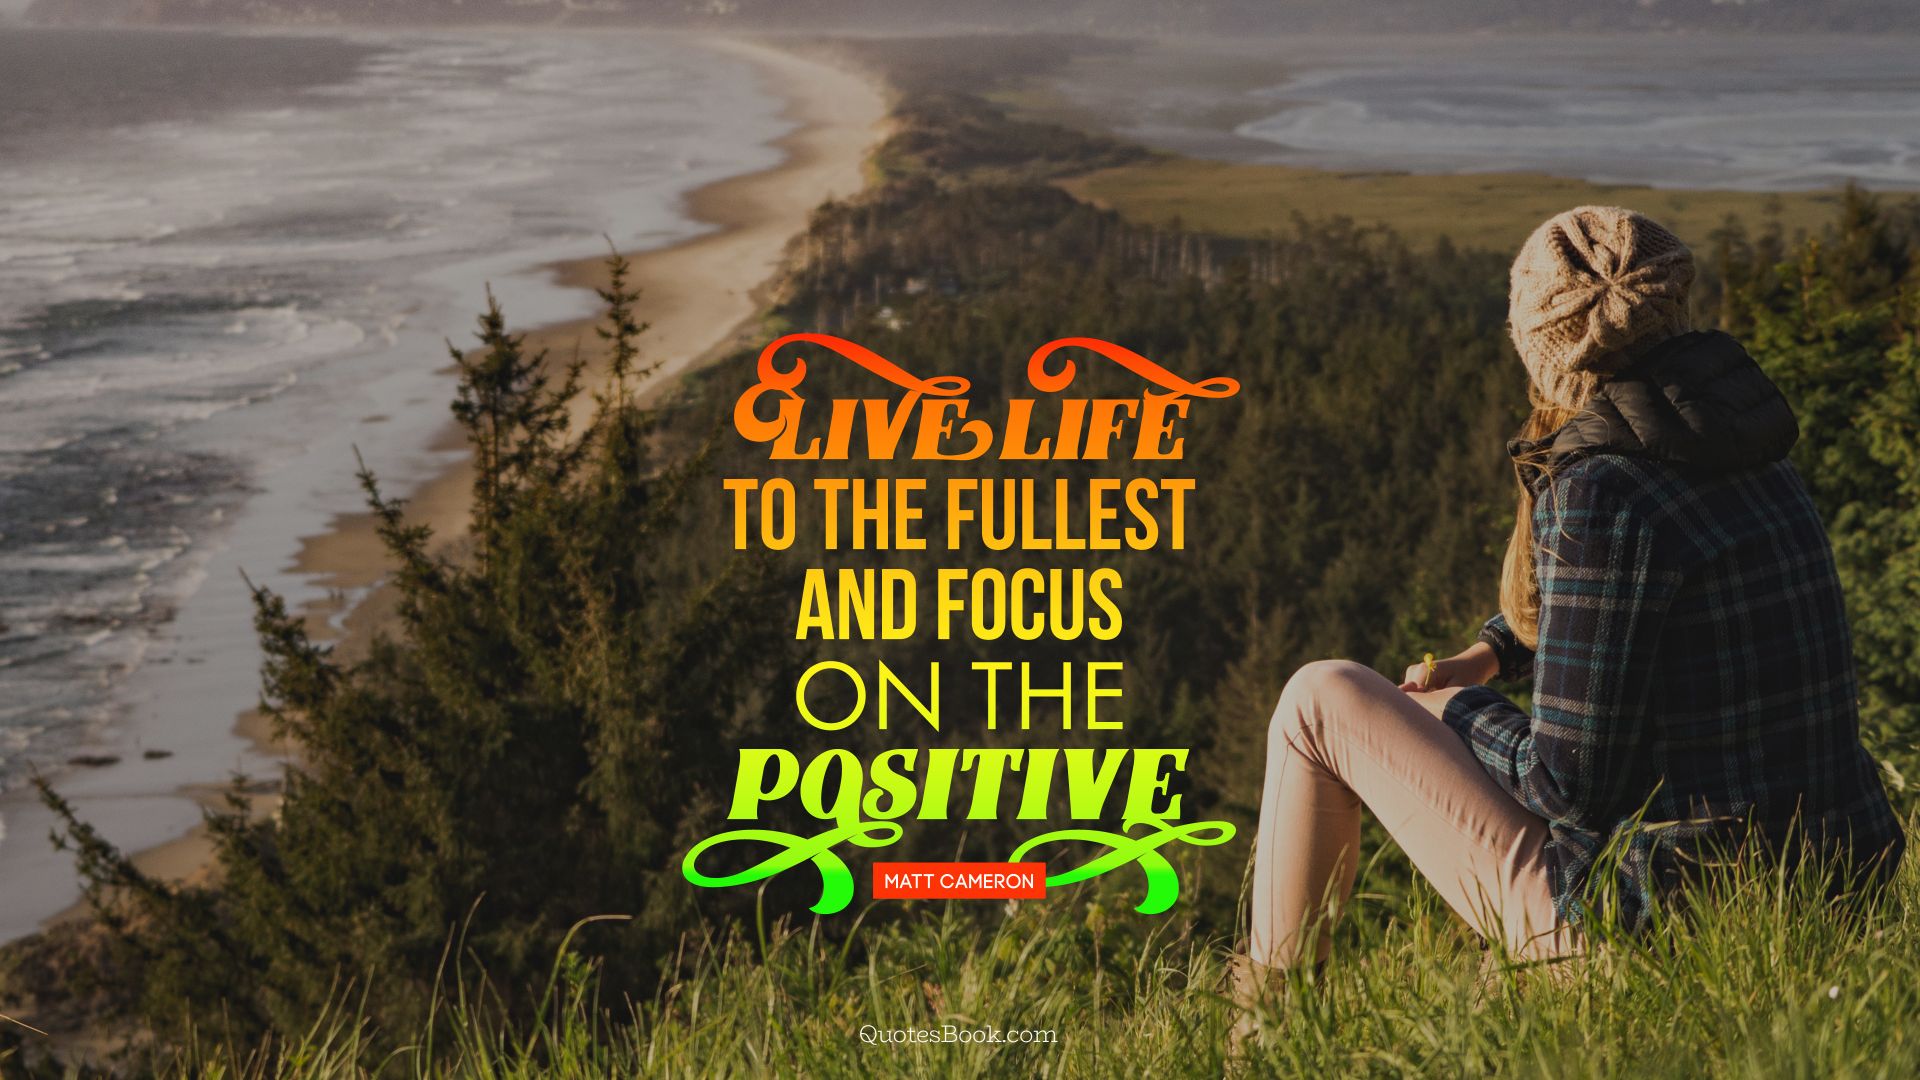 Live life to the fullest, and focus on the positive. - Quote by Matt Cameron